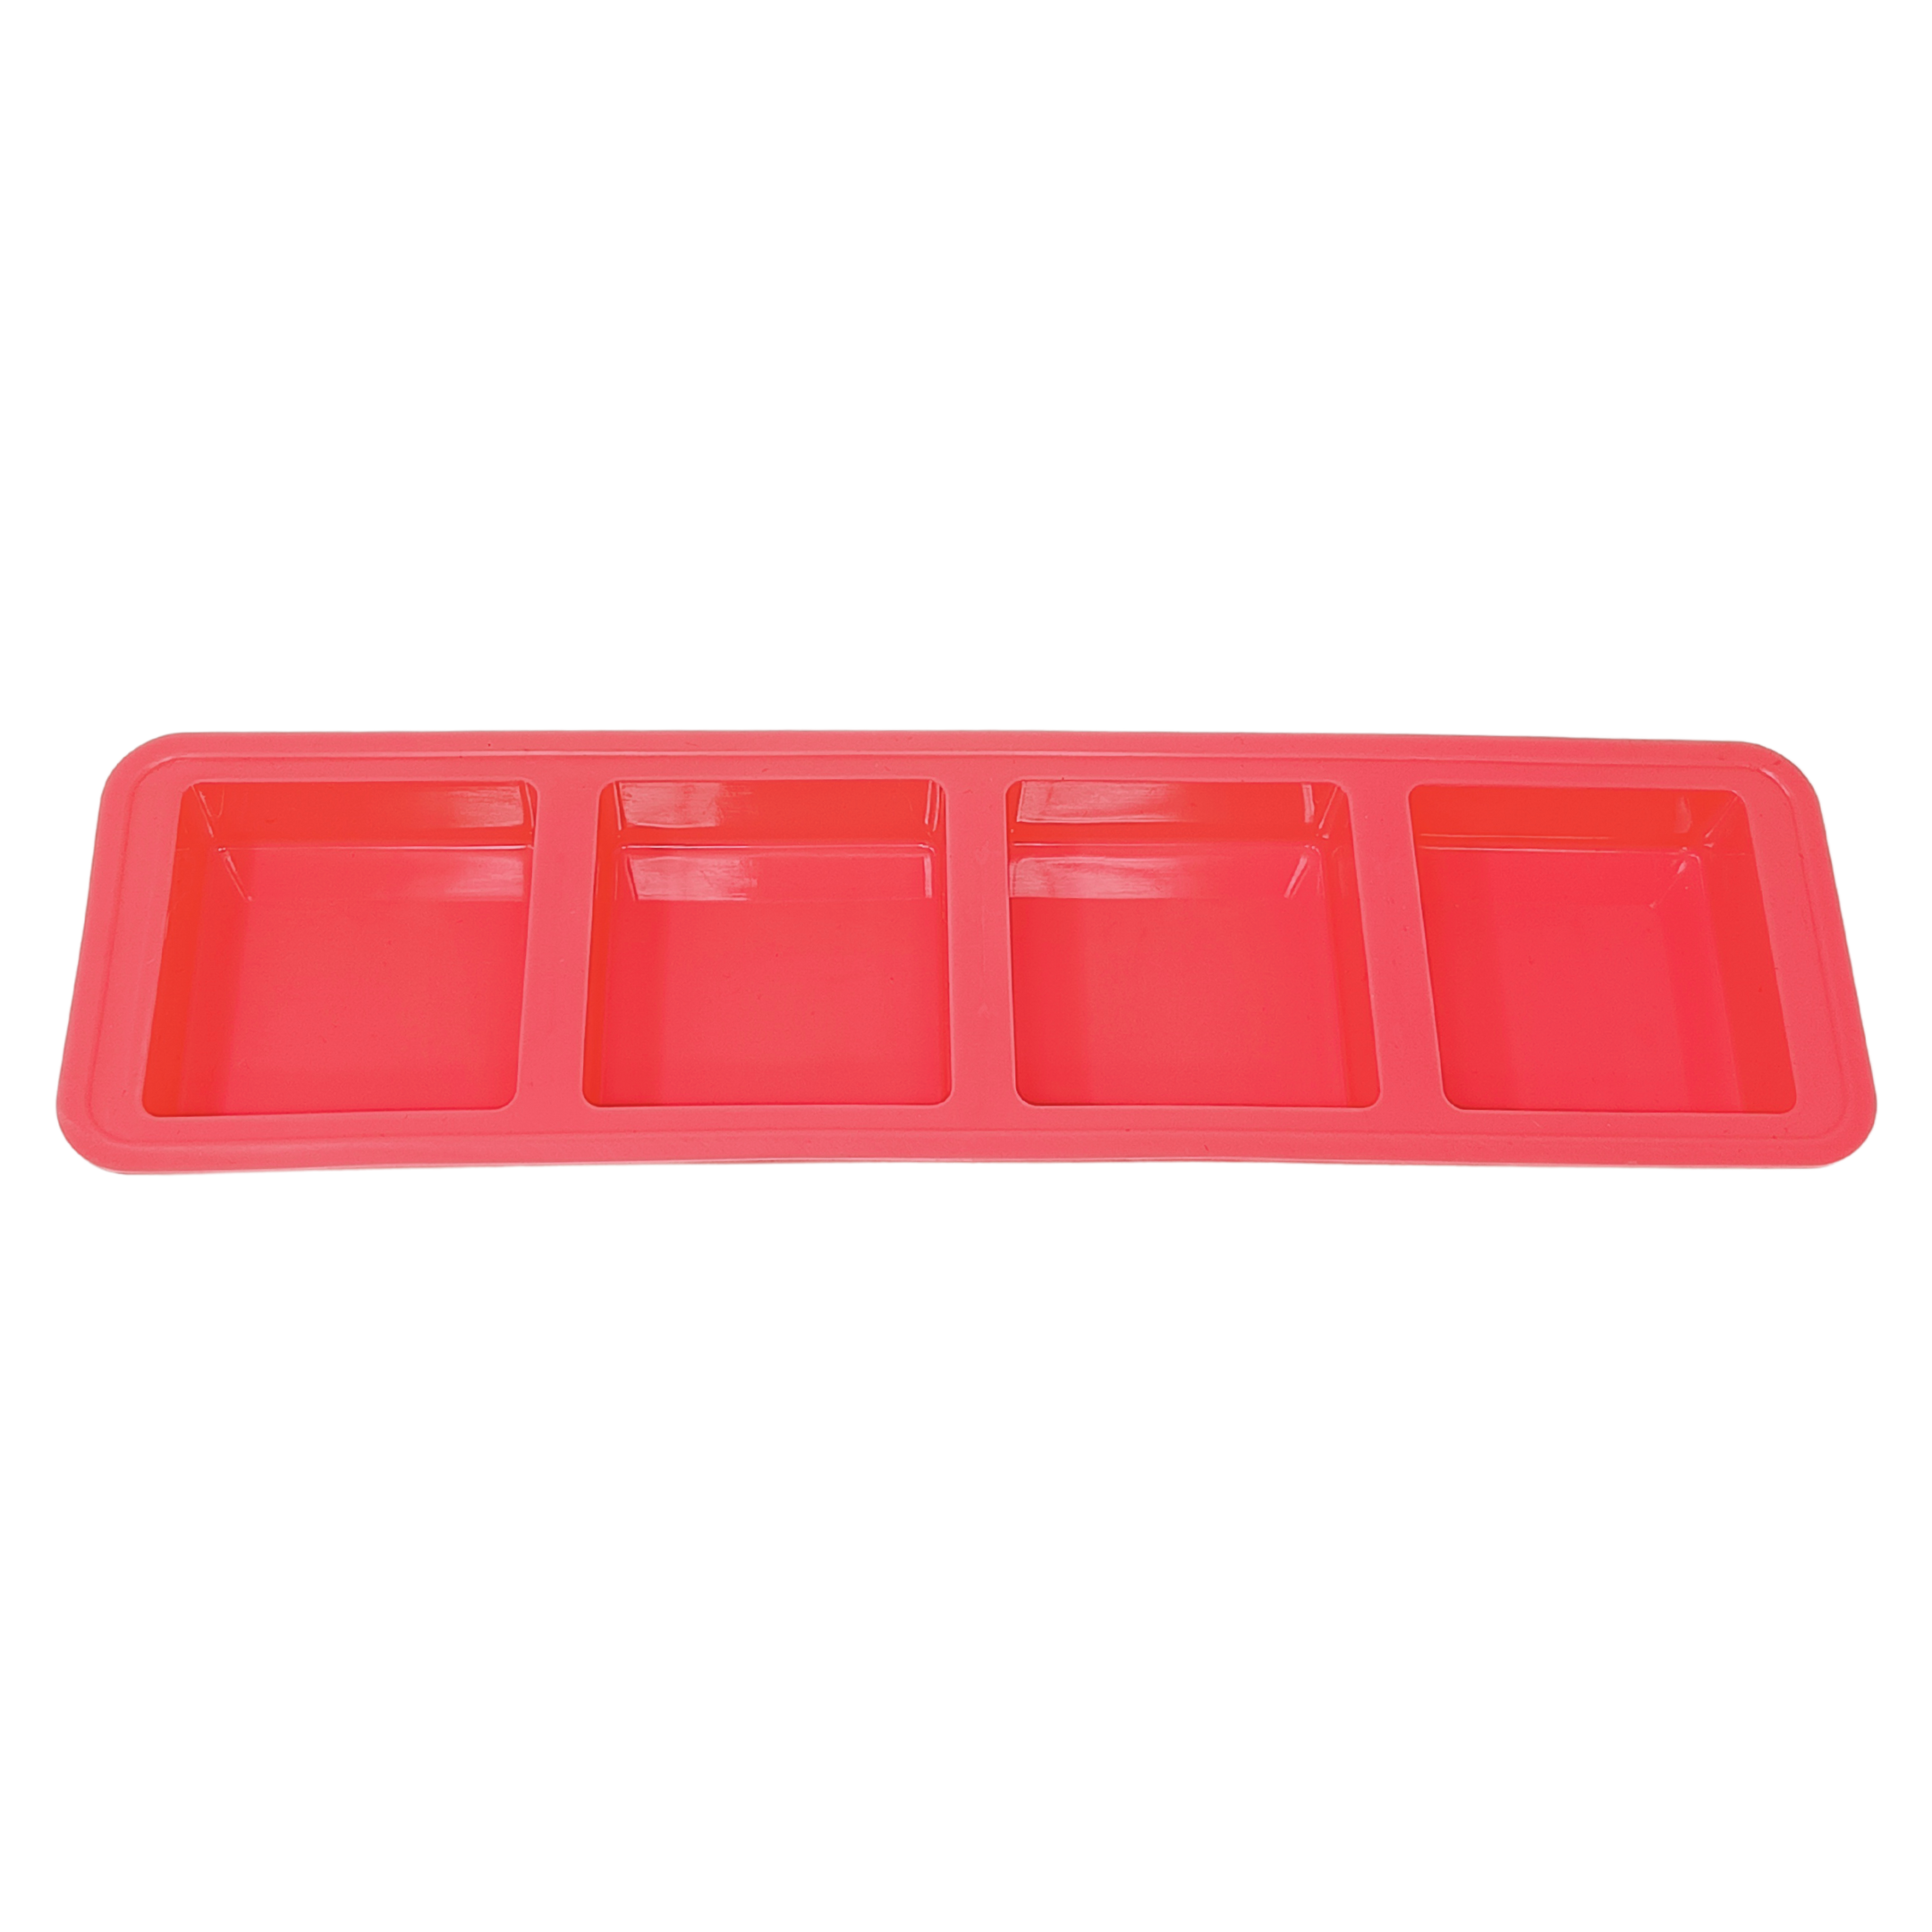 125ml Square Soap Mould - The Mould Story